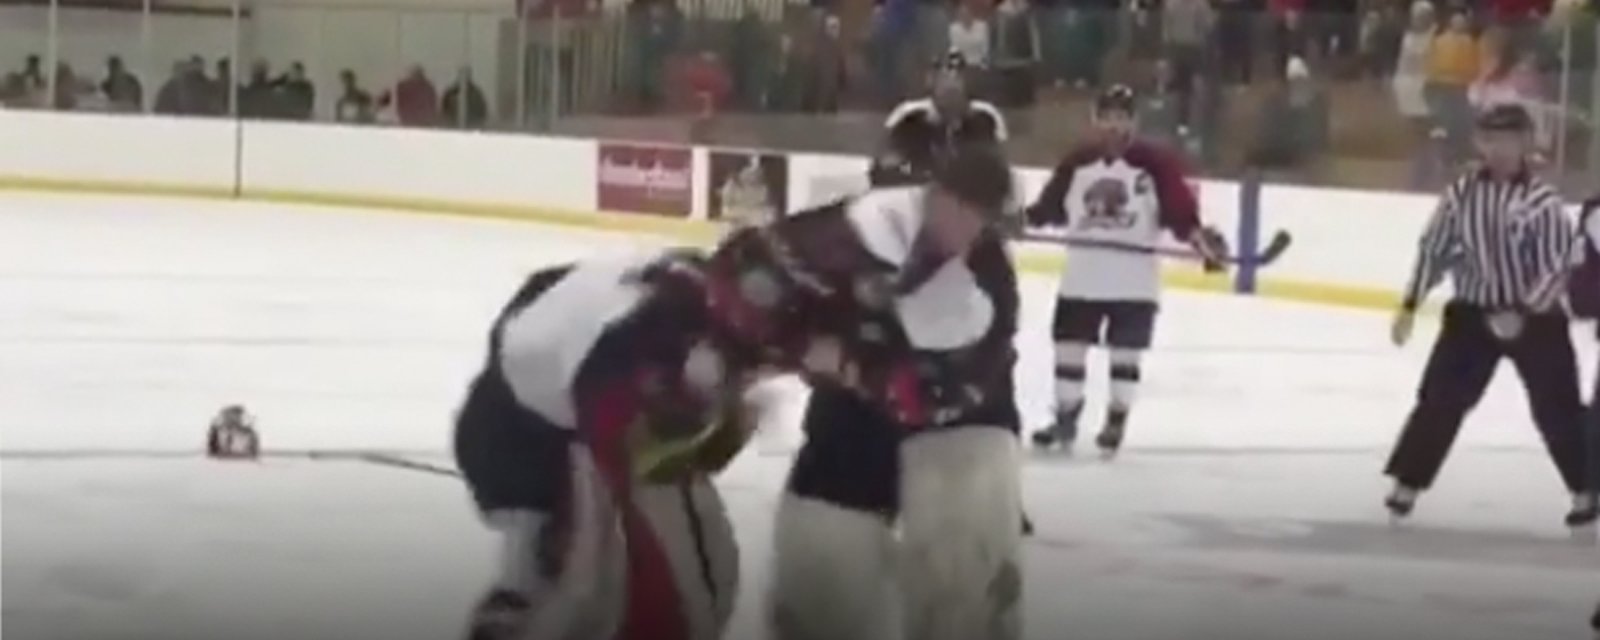 Must see: Crazy goalie fight, massive punches thrown!